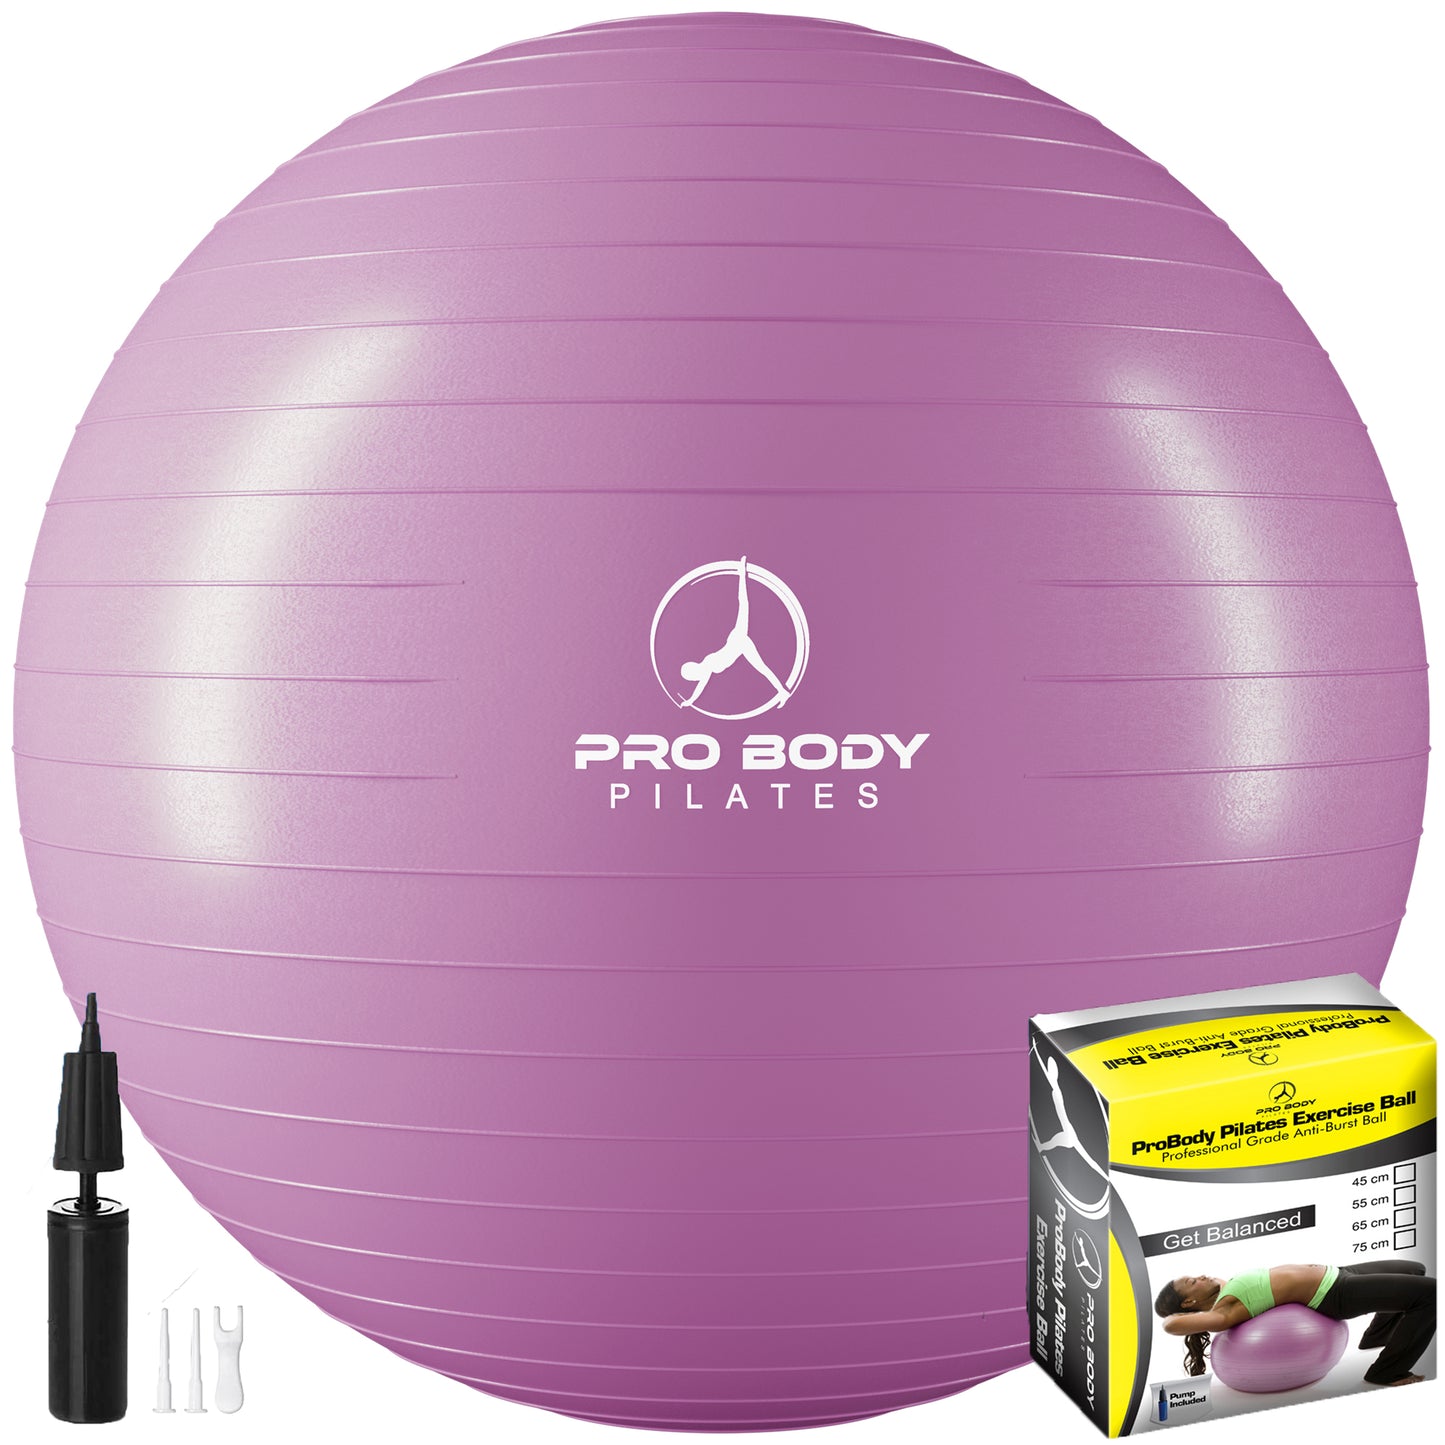 Yoga Ball for Pregnancy, Fitness, Balance, Workout at Home, Office and Physical Therapy (Purple)